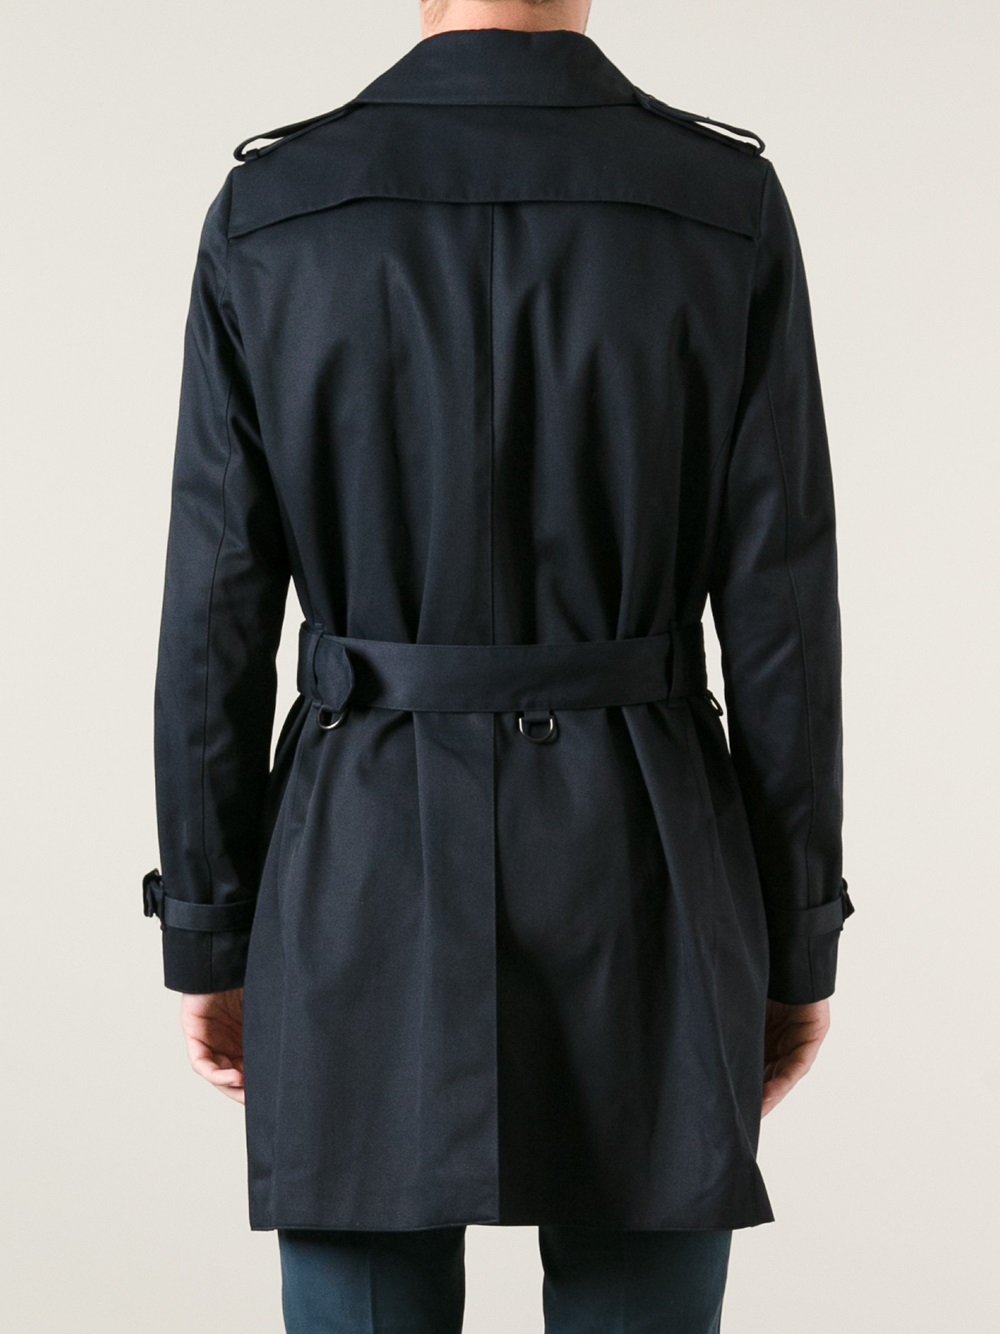 Lyst - Paul Smith Trench Coat in Blue for Men